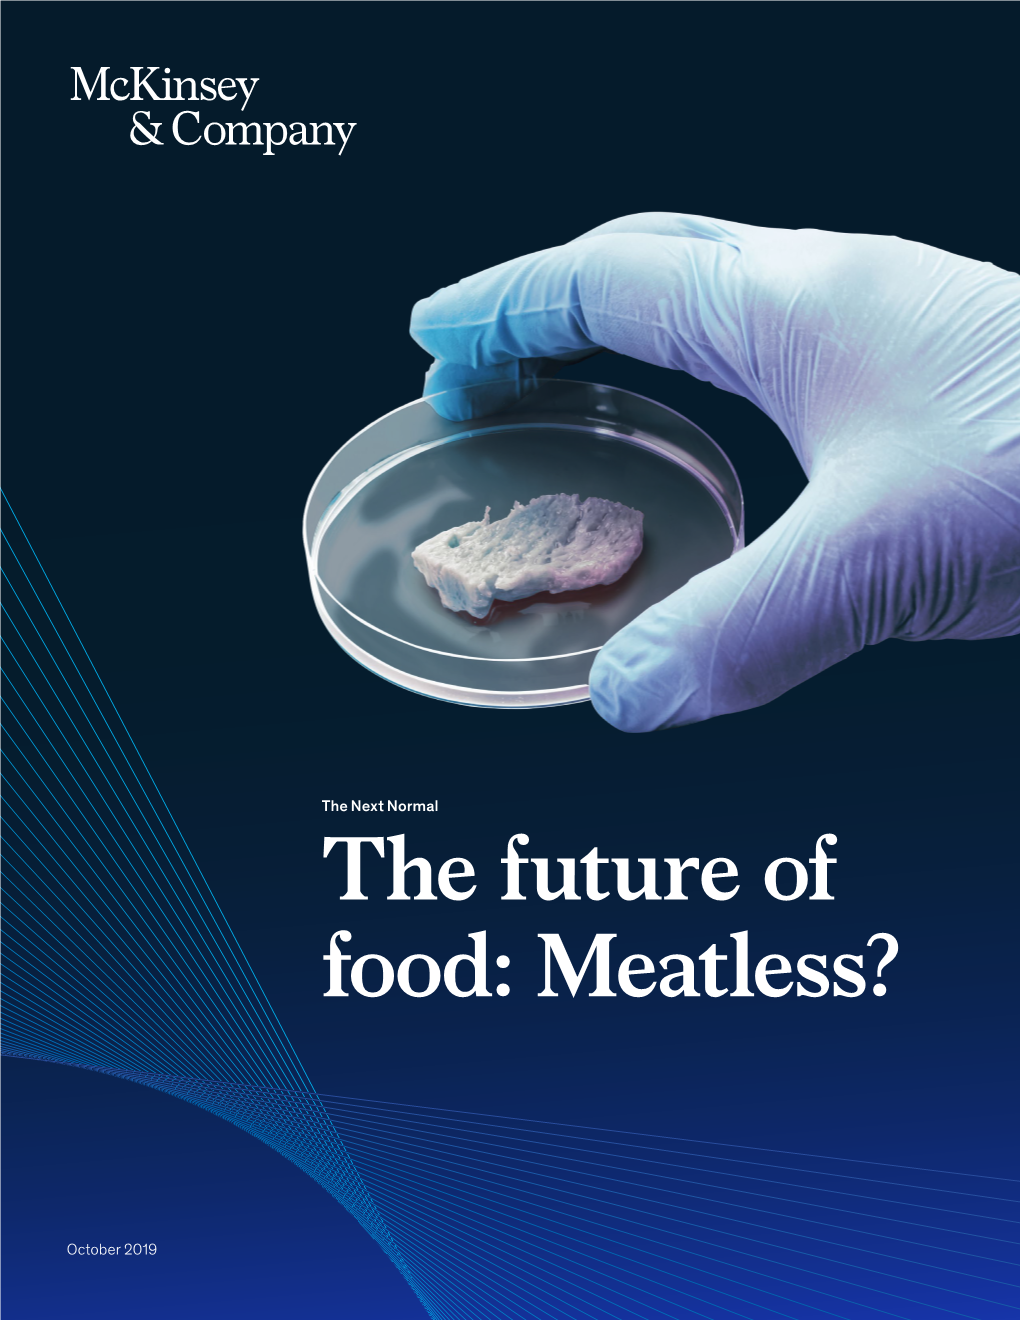 The Next Normal the Future of Food: Meatless?